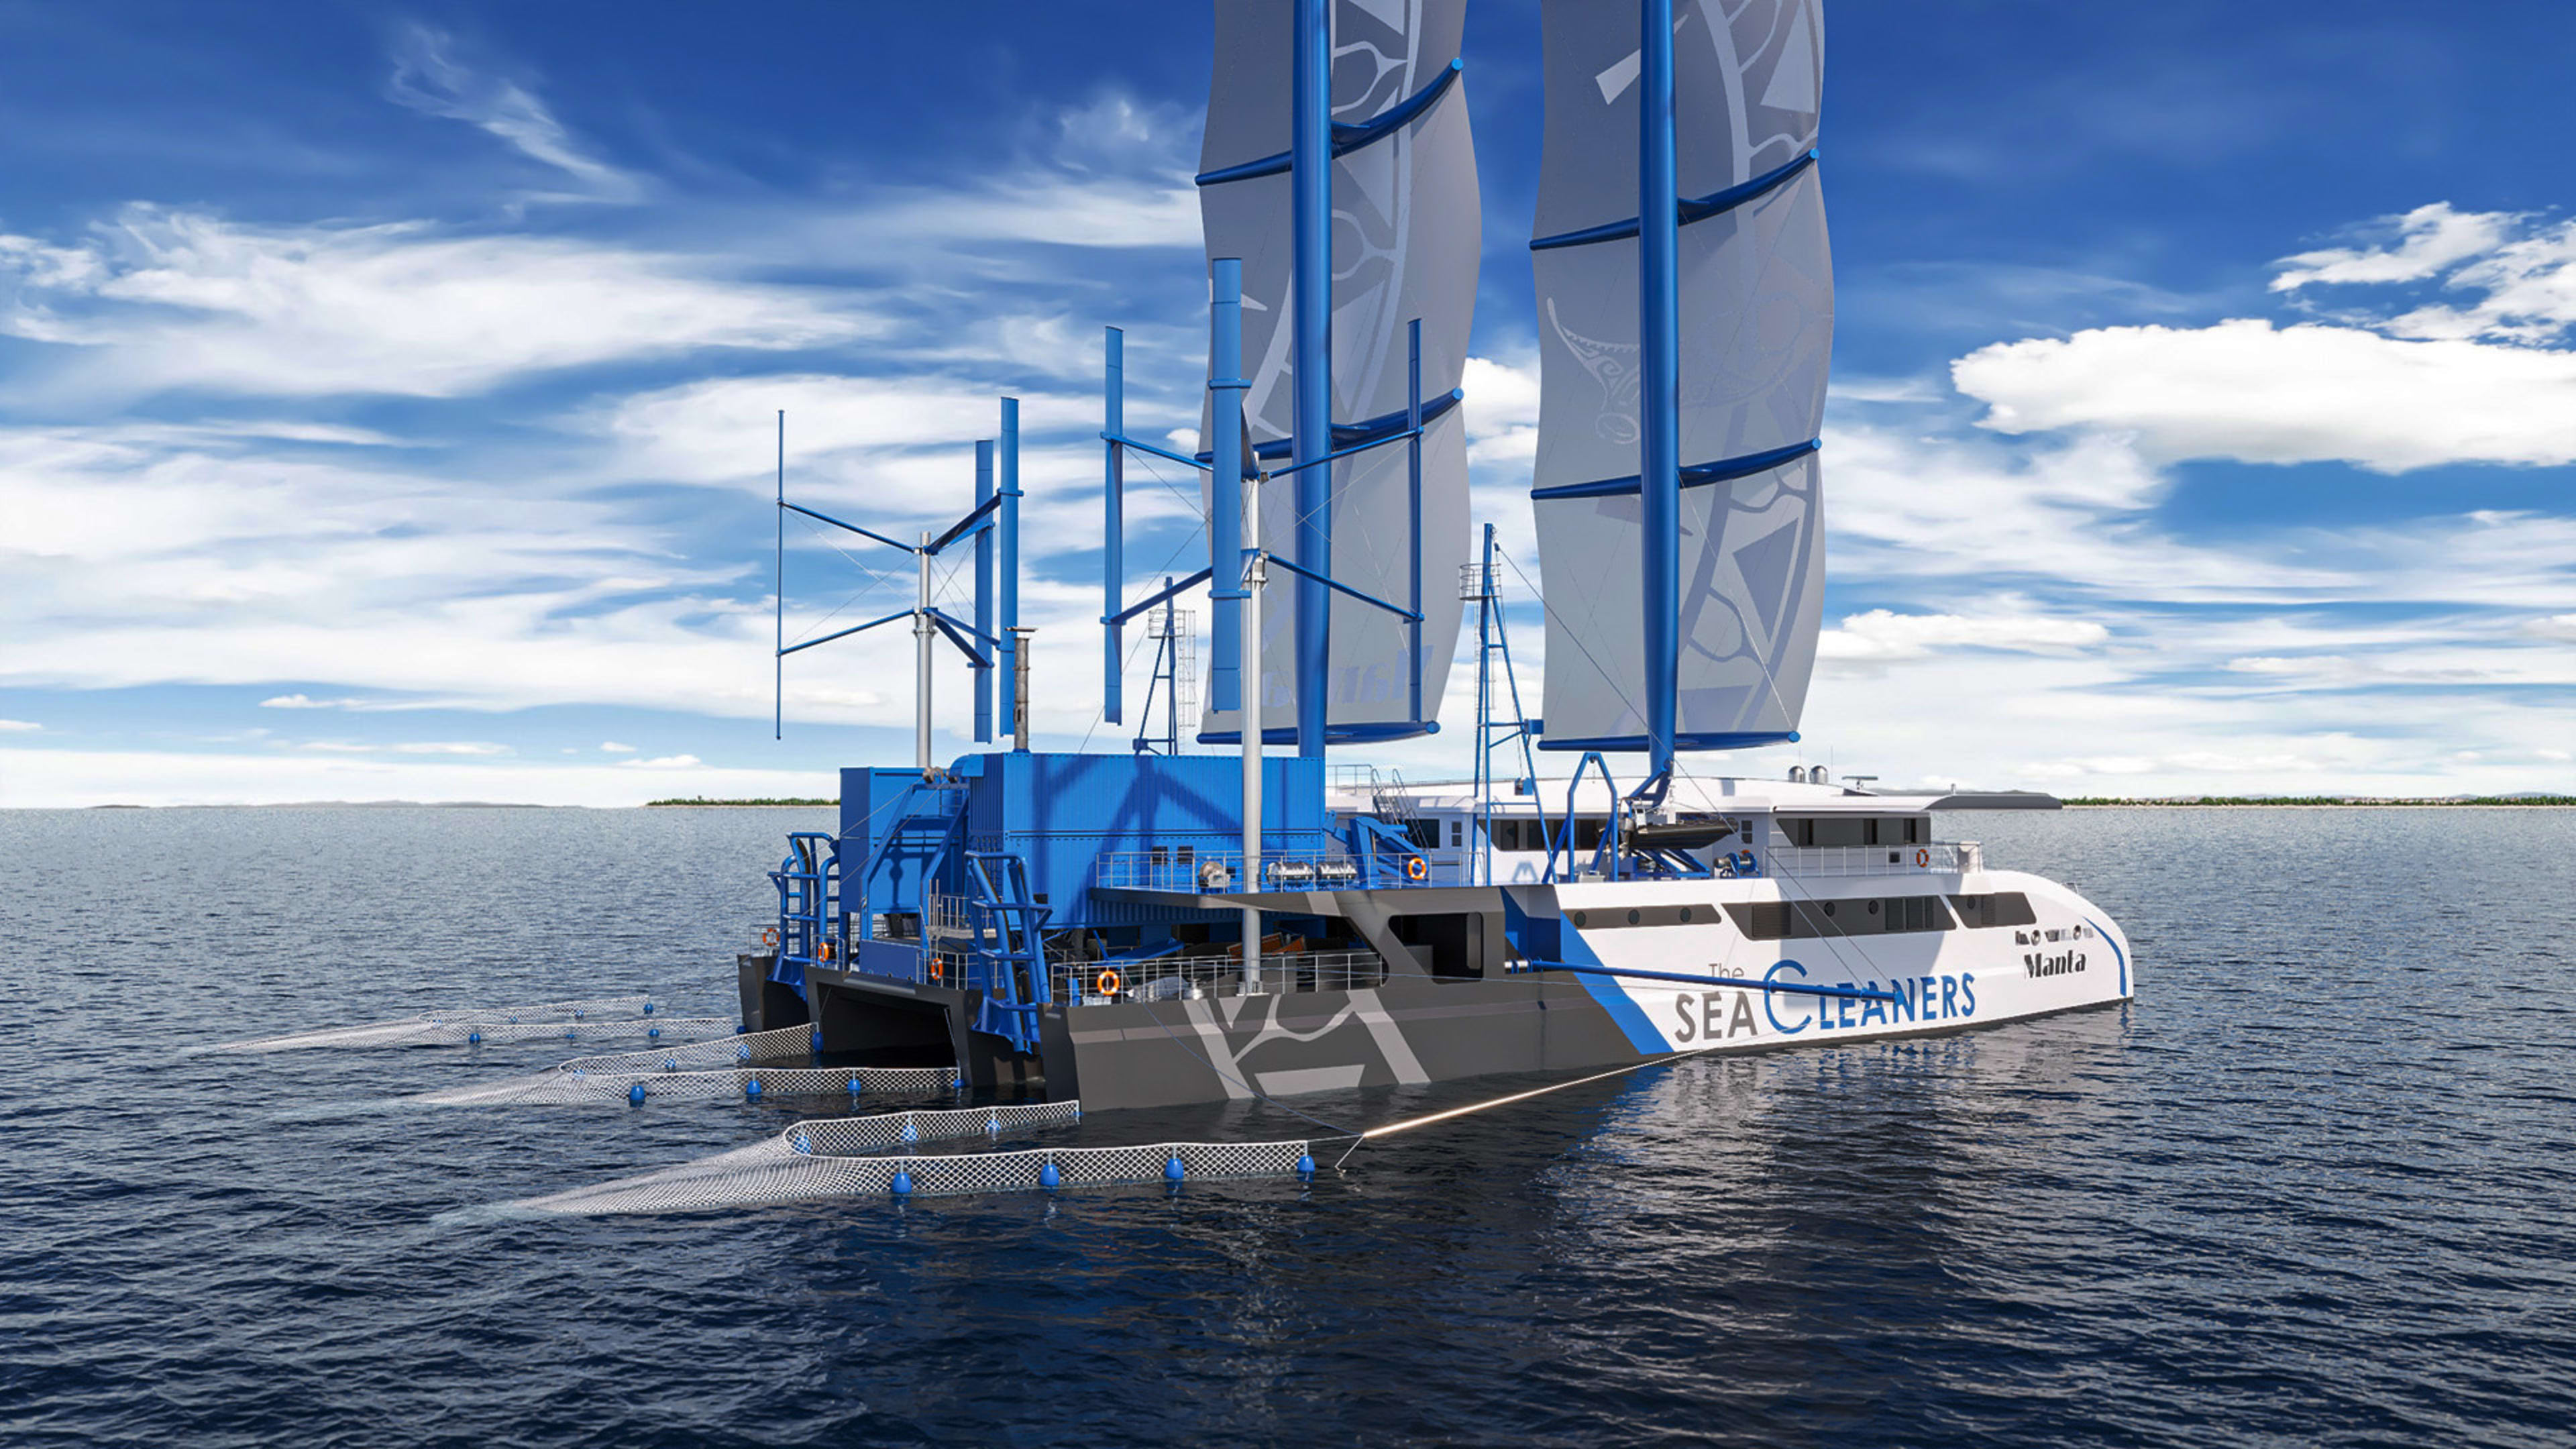 This boat powers itself with the ocean plastic it collects as it sails